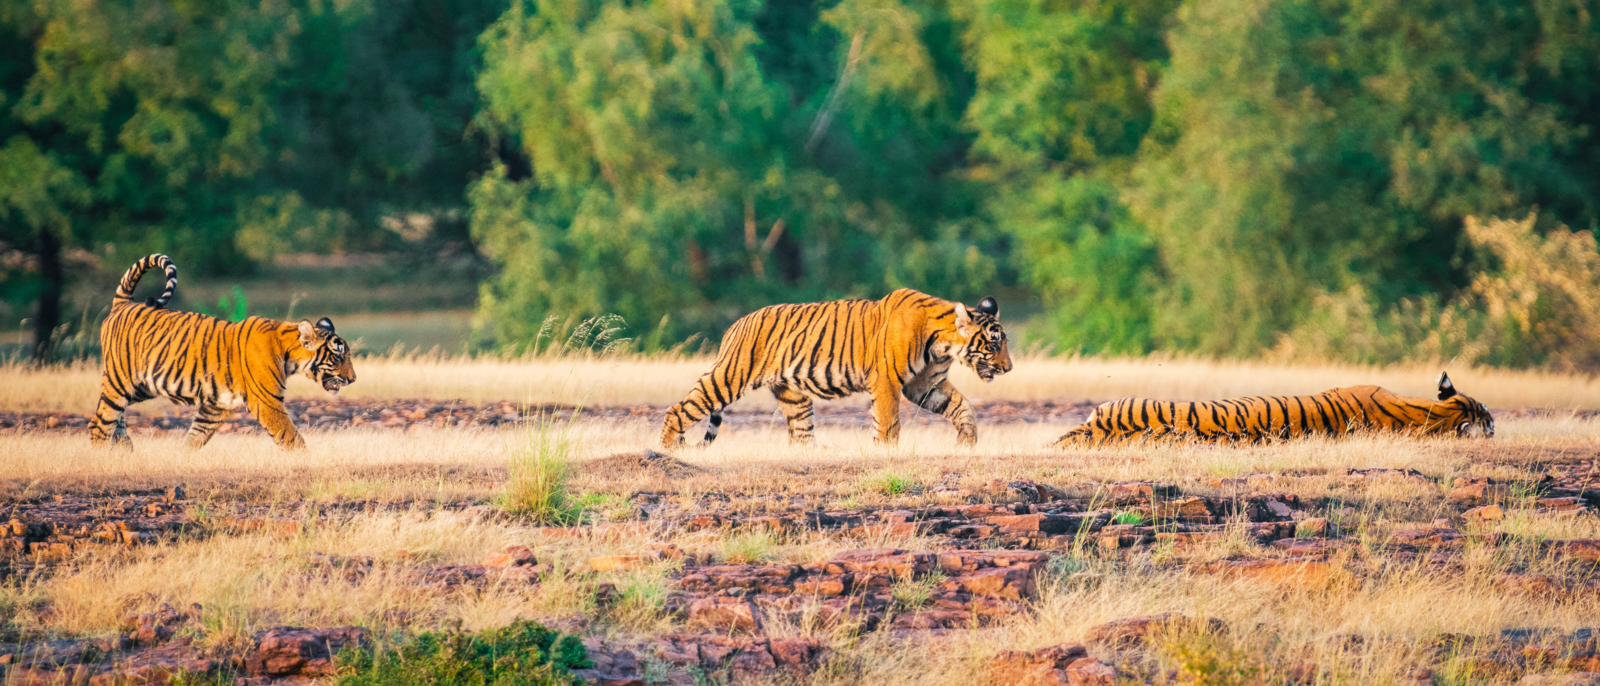 A tigress and her cubs whole tiger family resting during evening light at Ranthambore Tiger Reserve, India